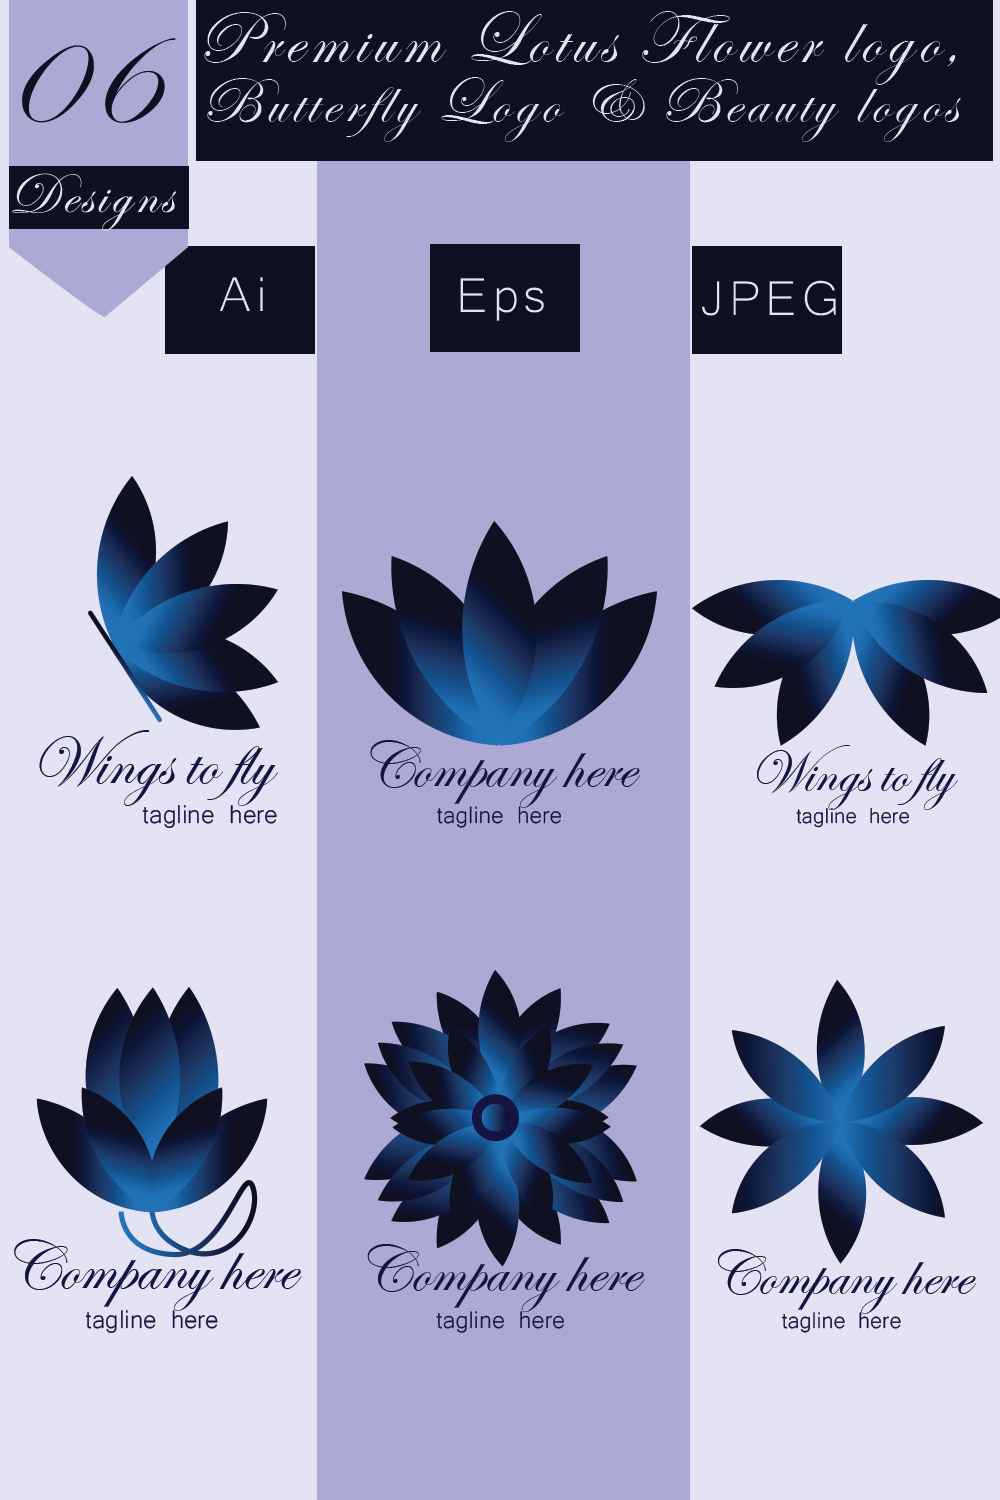 6 Premium Lotus Flower, butterfly Logo, Fashion Logos & Beauty Logos for your brand or Fashion company with Luxury Blue color pinterest preview image.